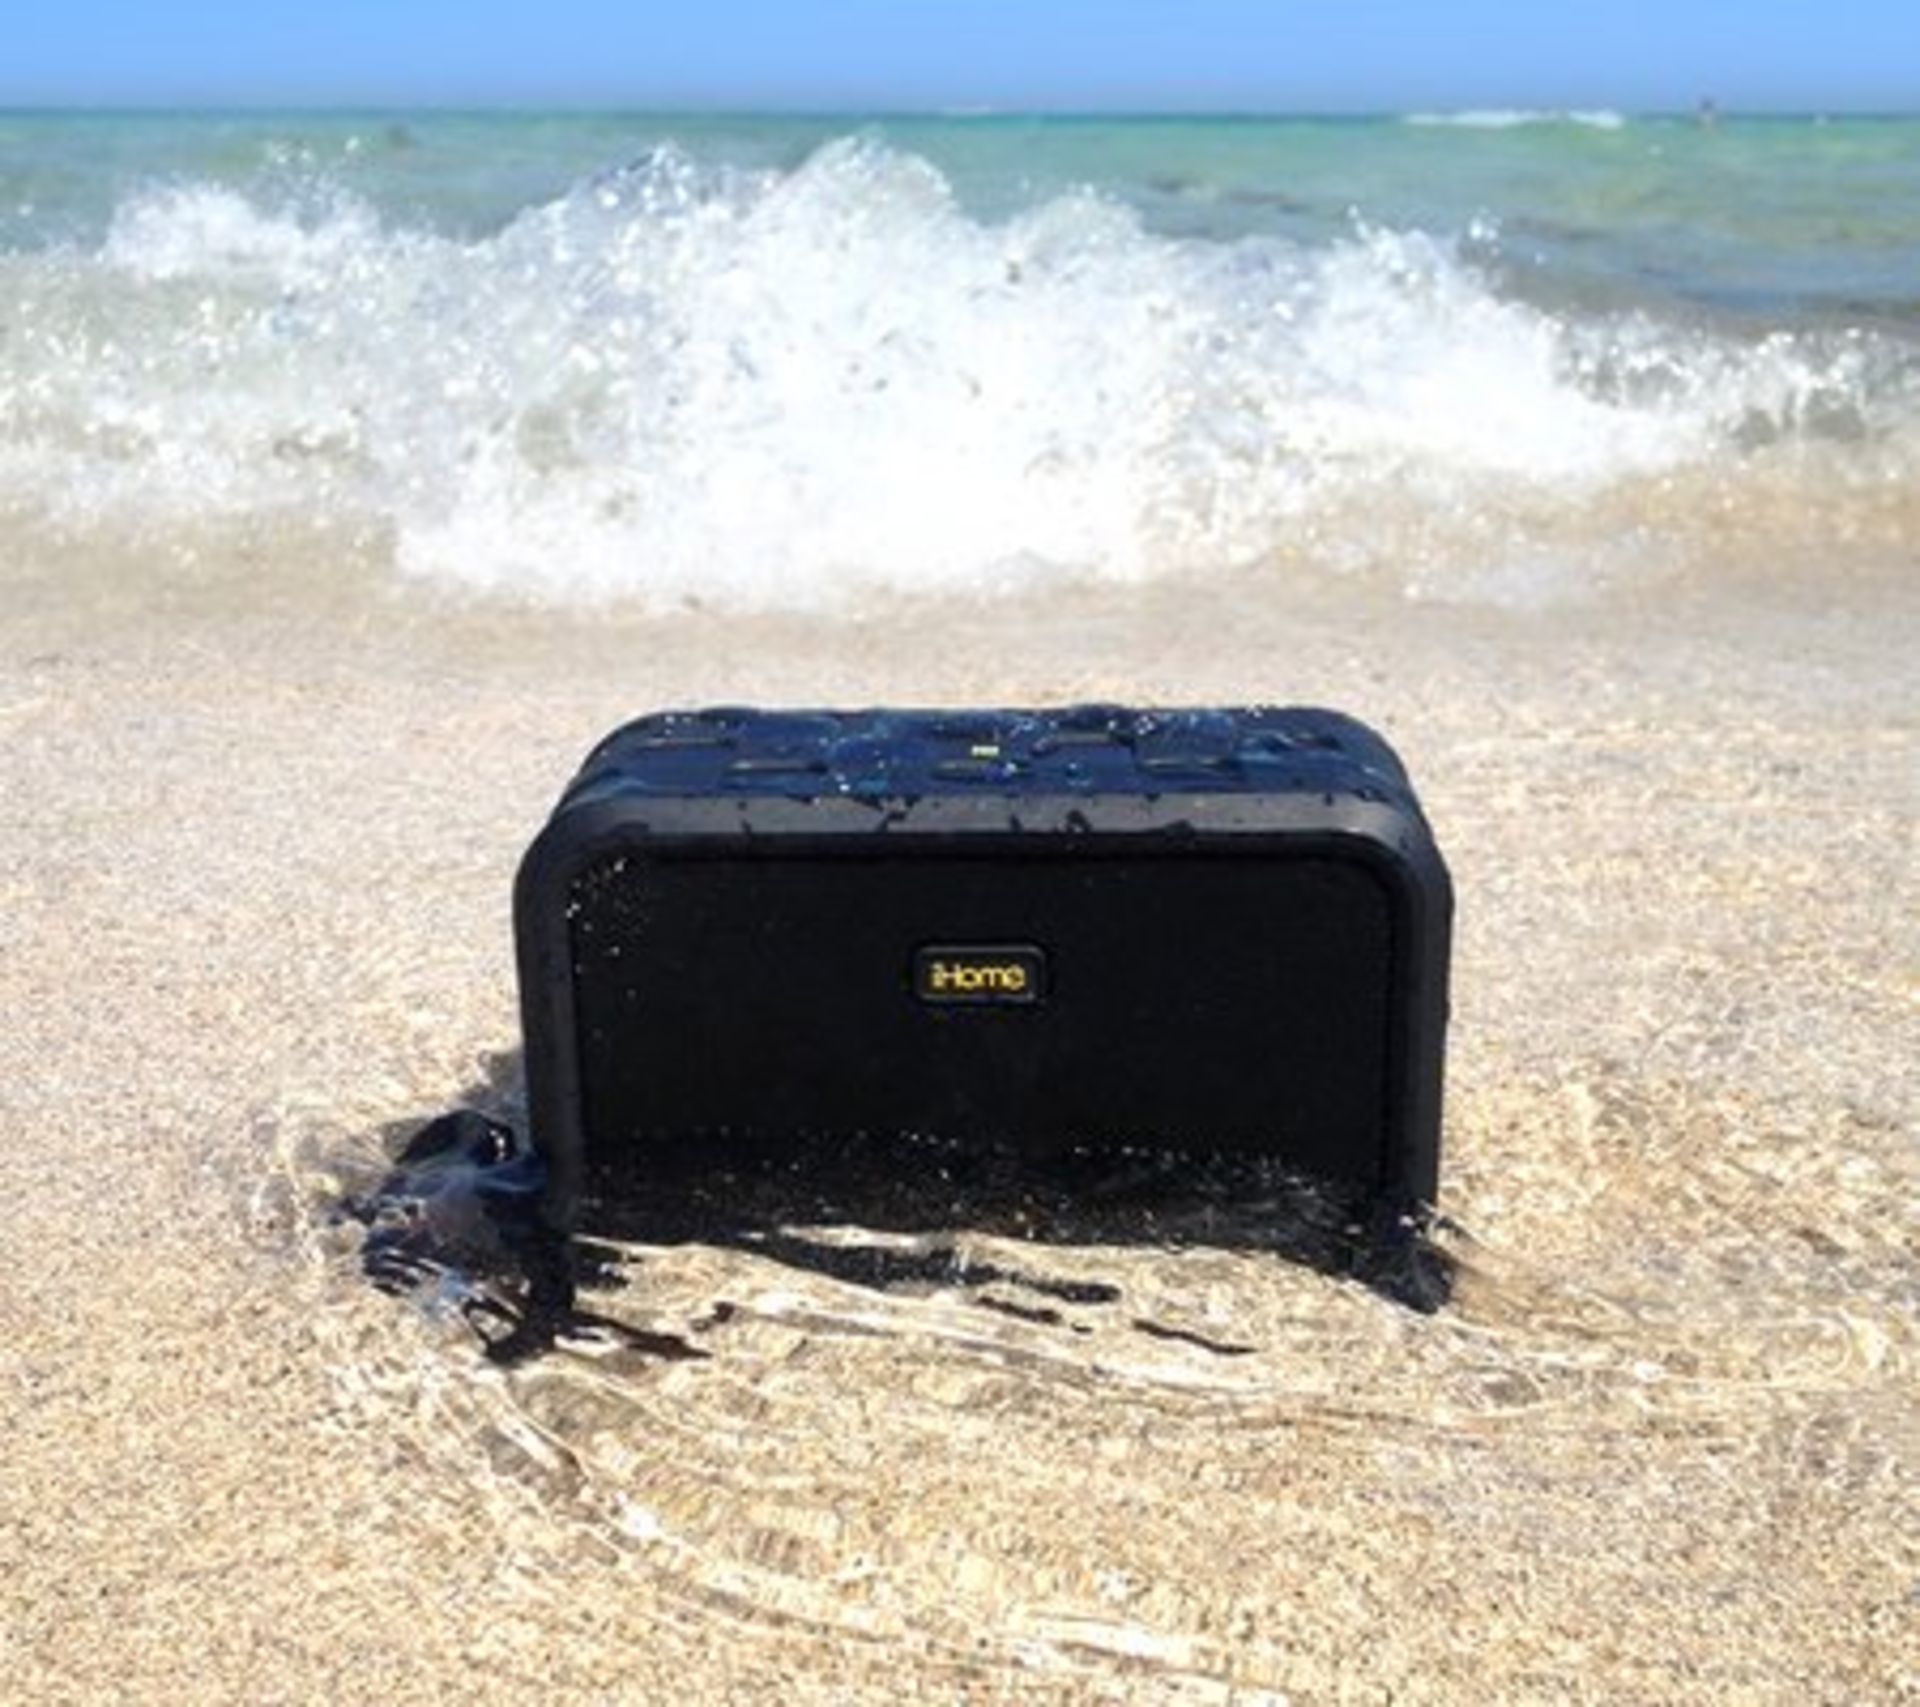 V *TRADE QTY* Brand New IHome Rugged Portable Waterproof Bluetooth Stereo Speaker-IPX7 Waterproof - Image 2 of 3